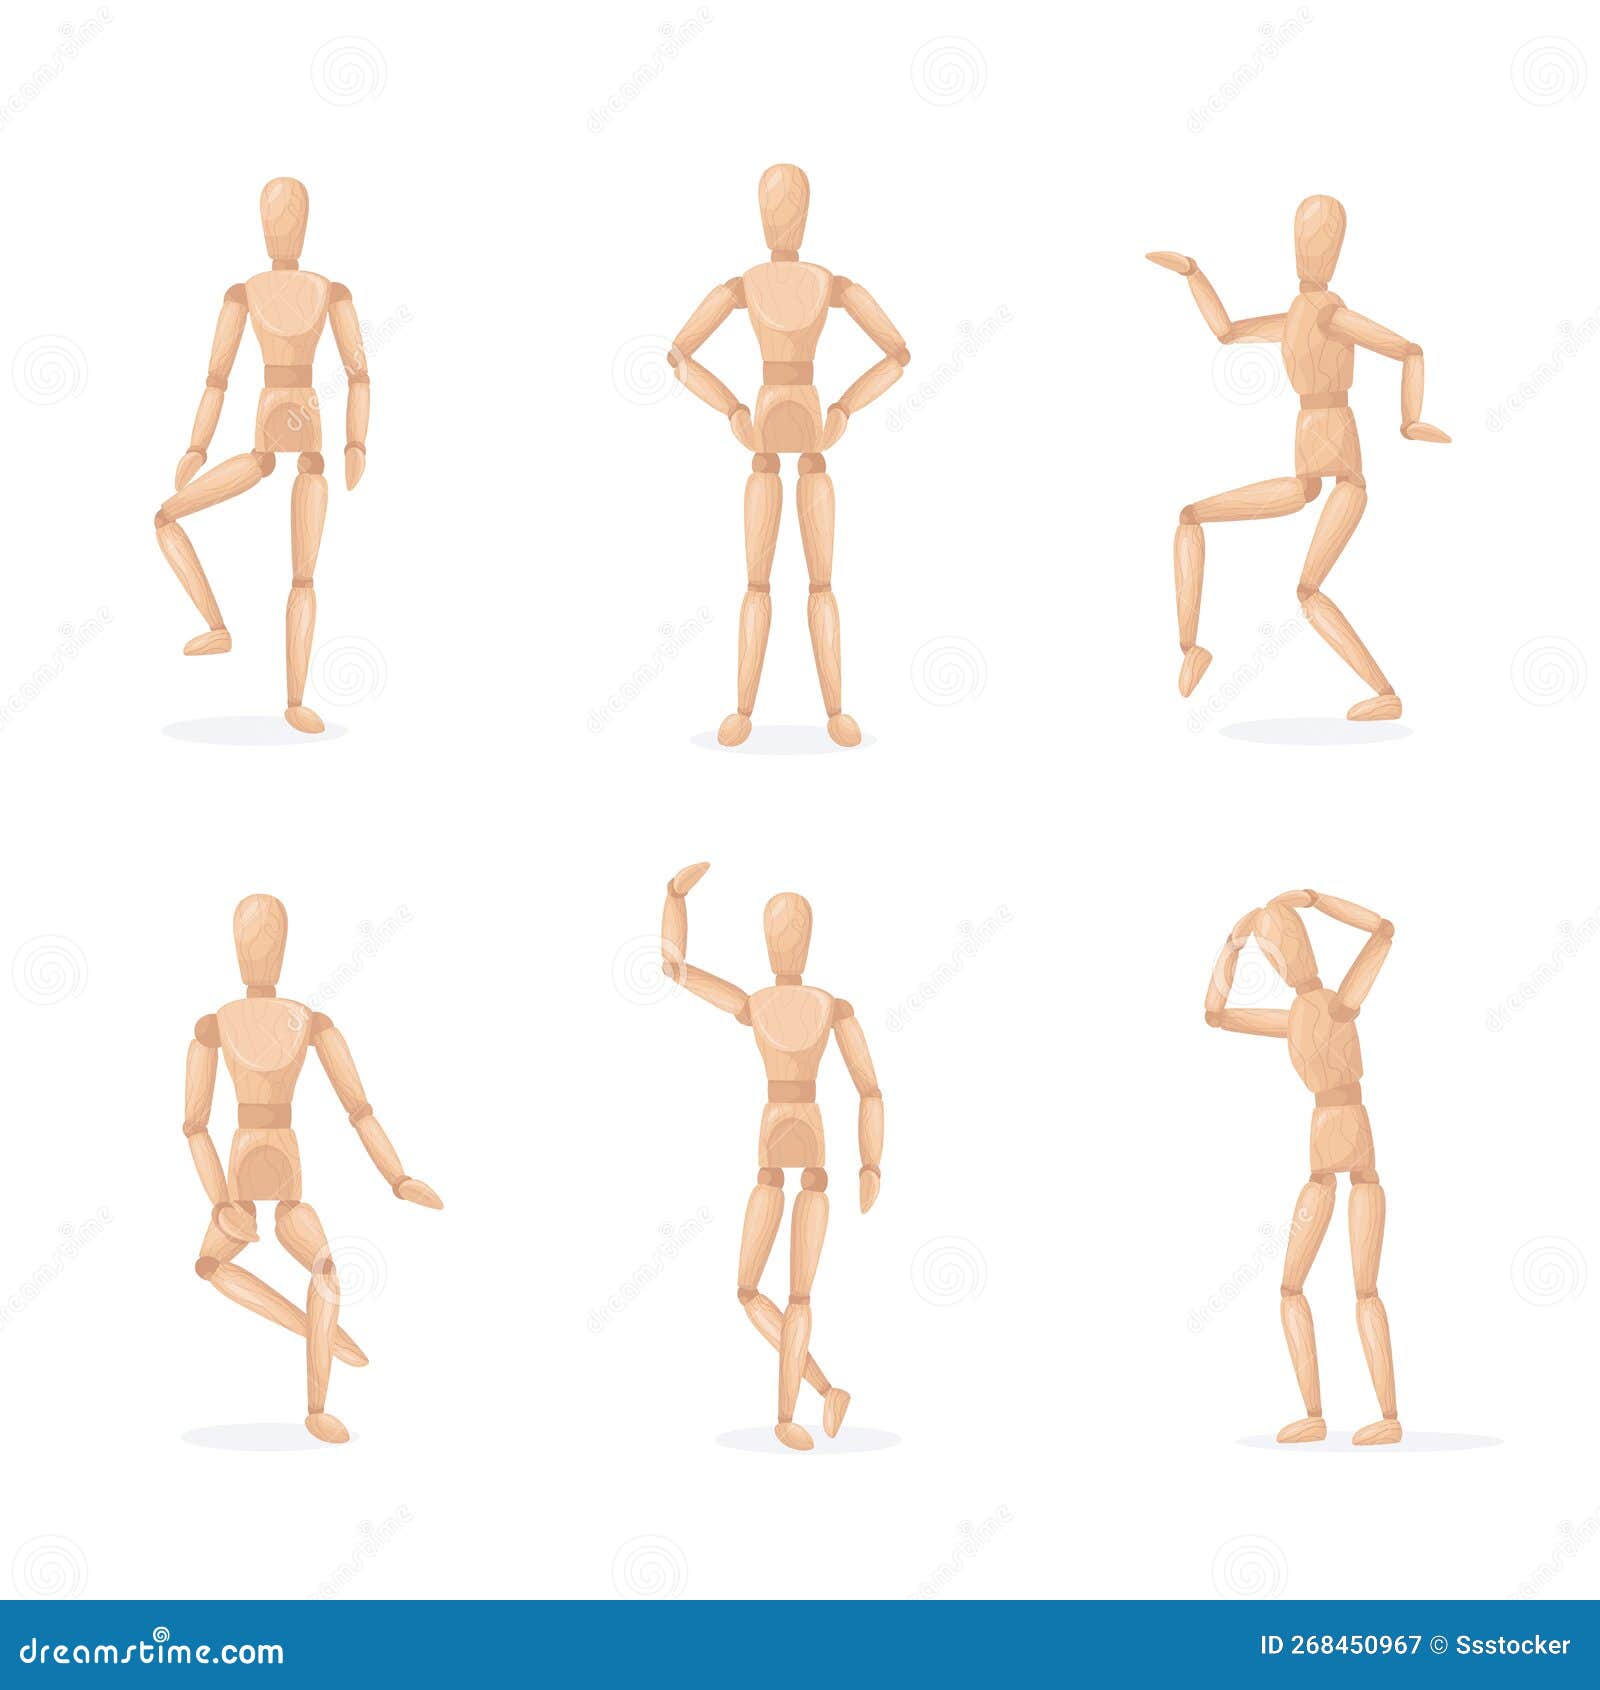 Pose Dummy Stock Photos and Images - 123RF